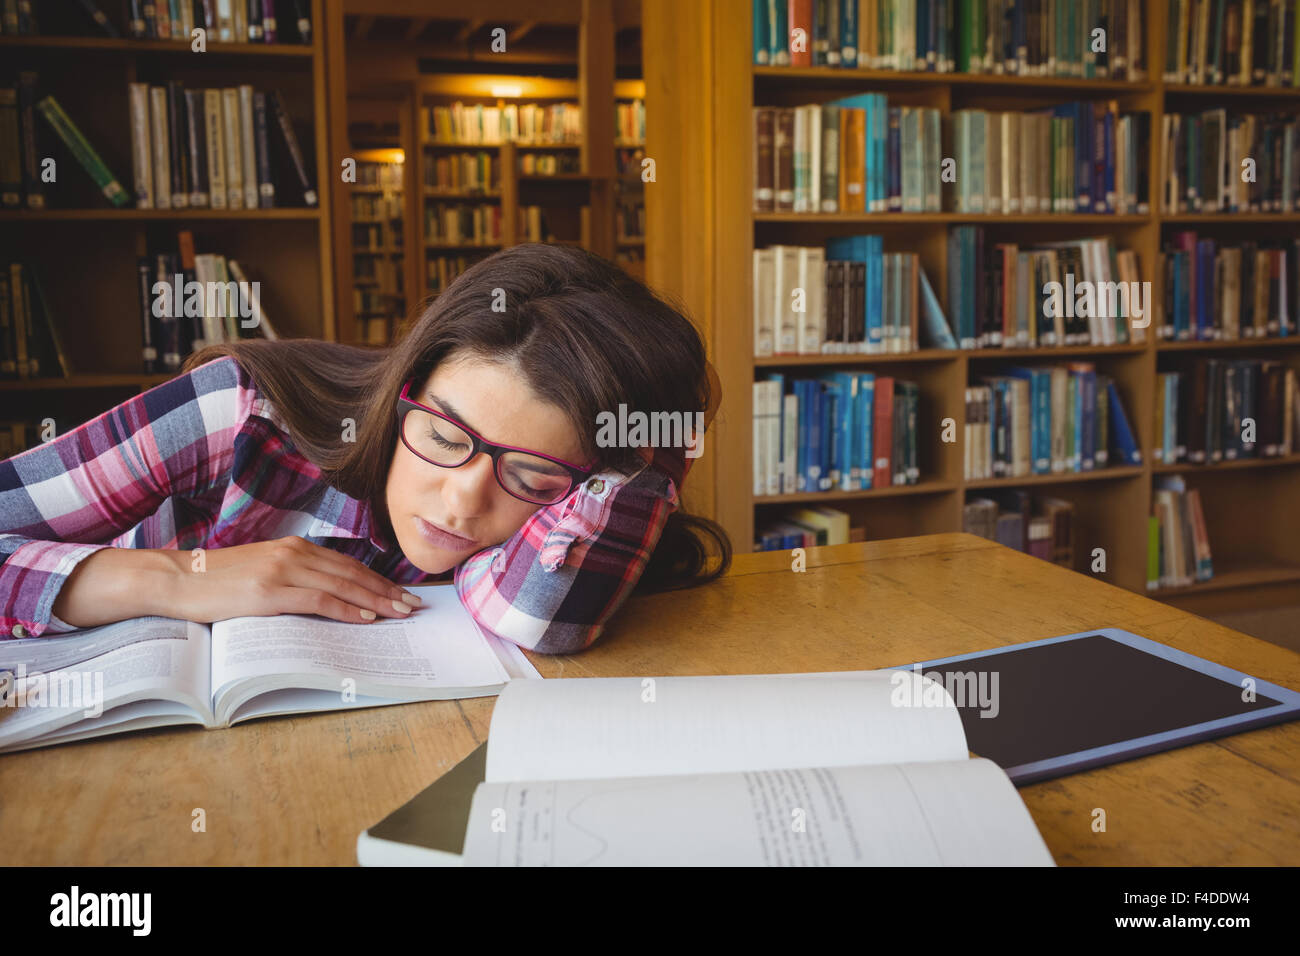 Female student napping on book in library Stock Photo